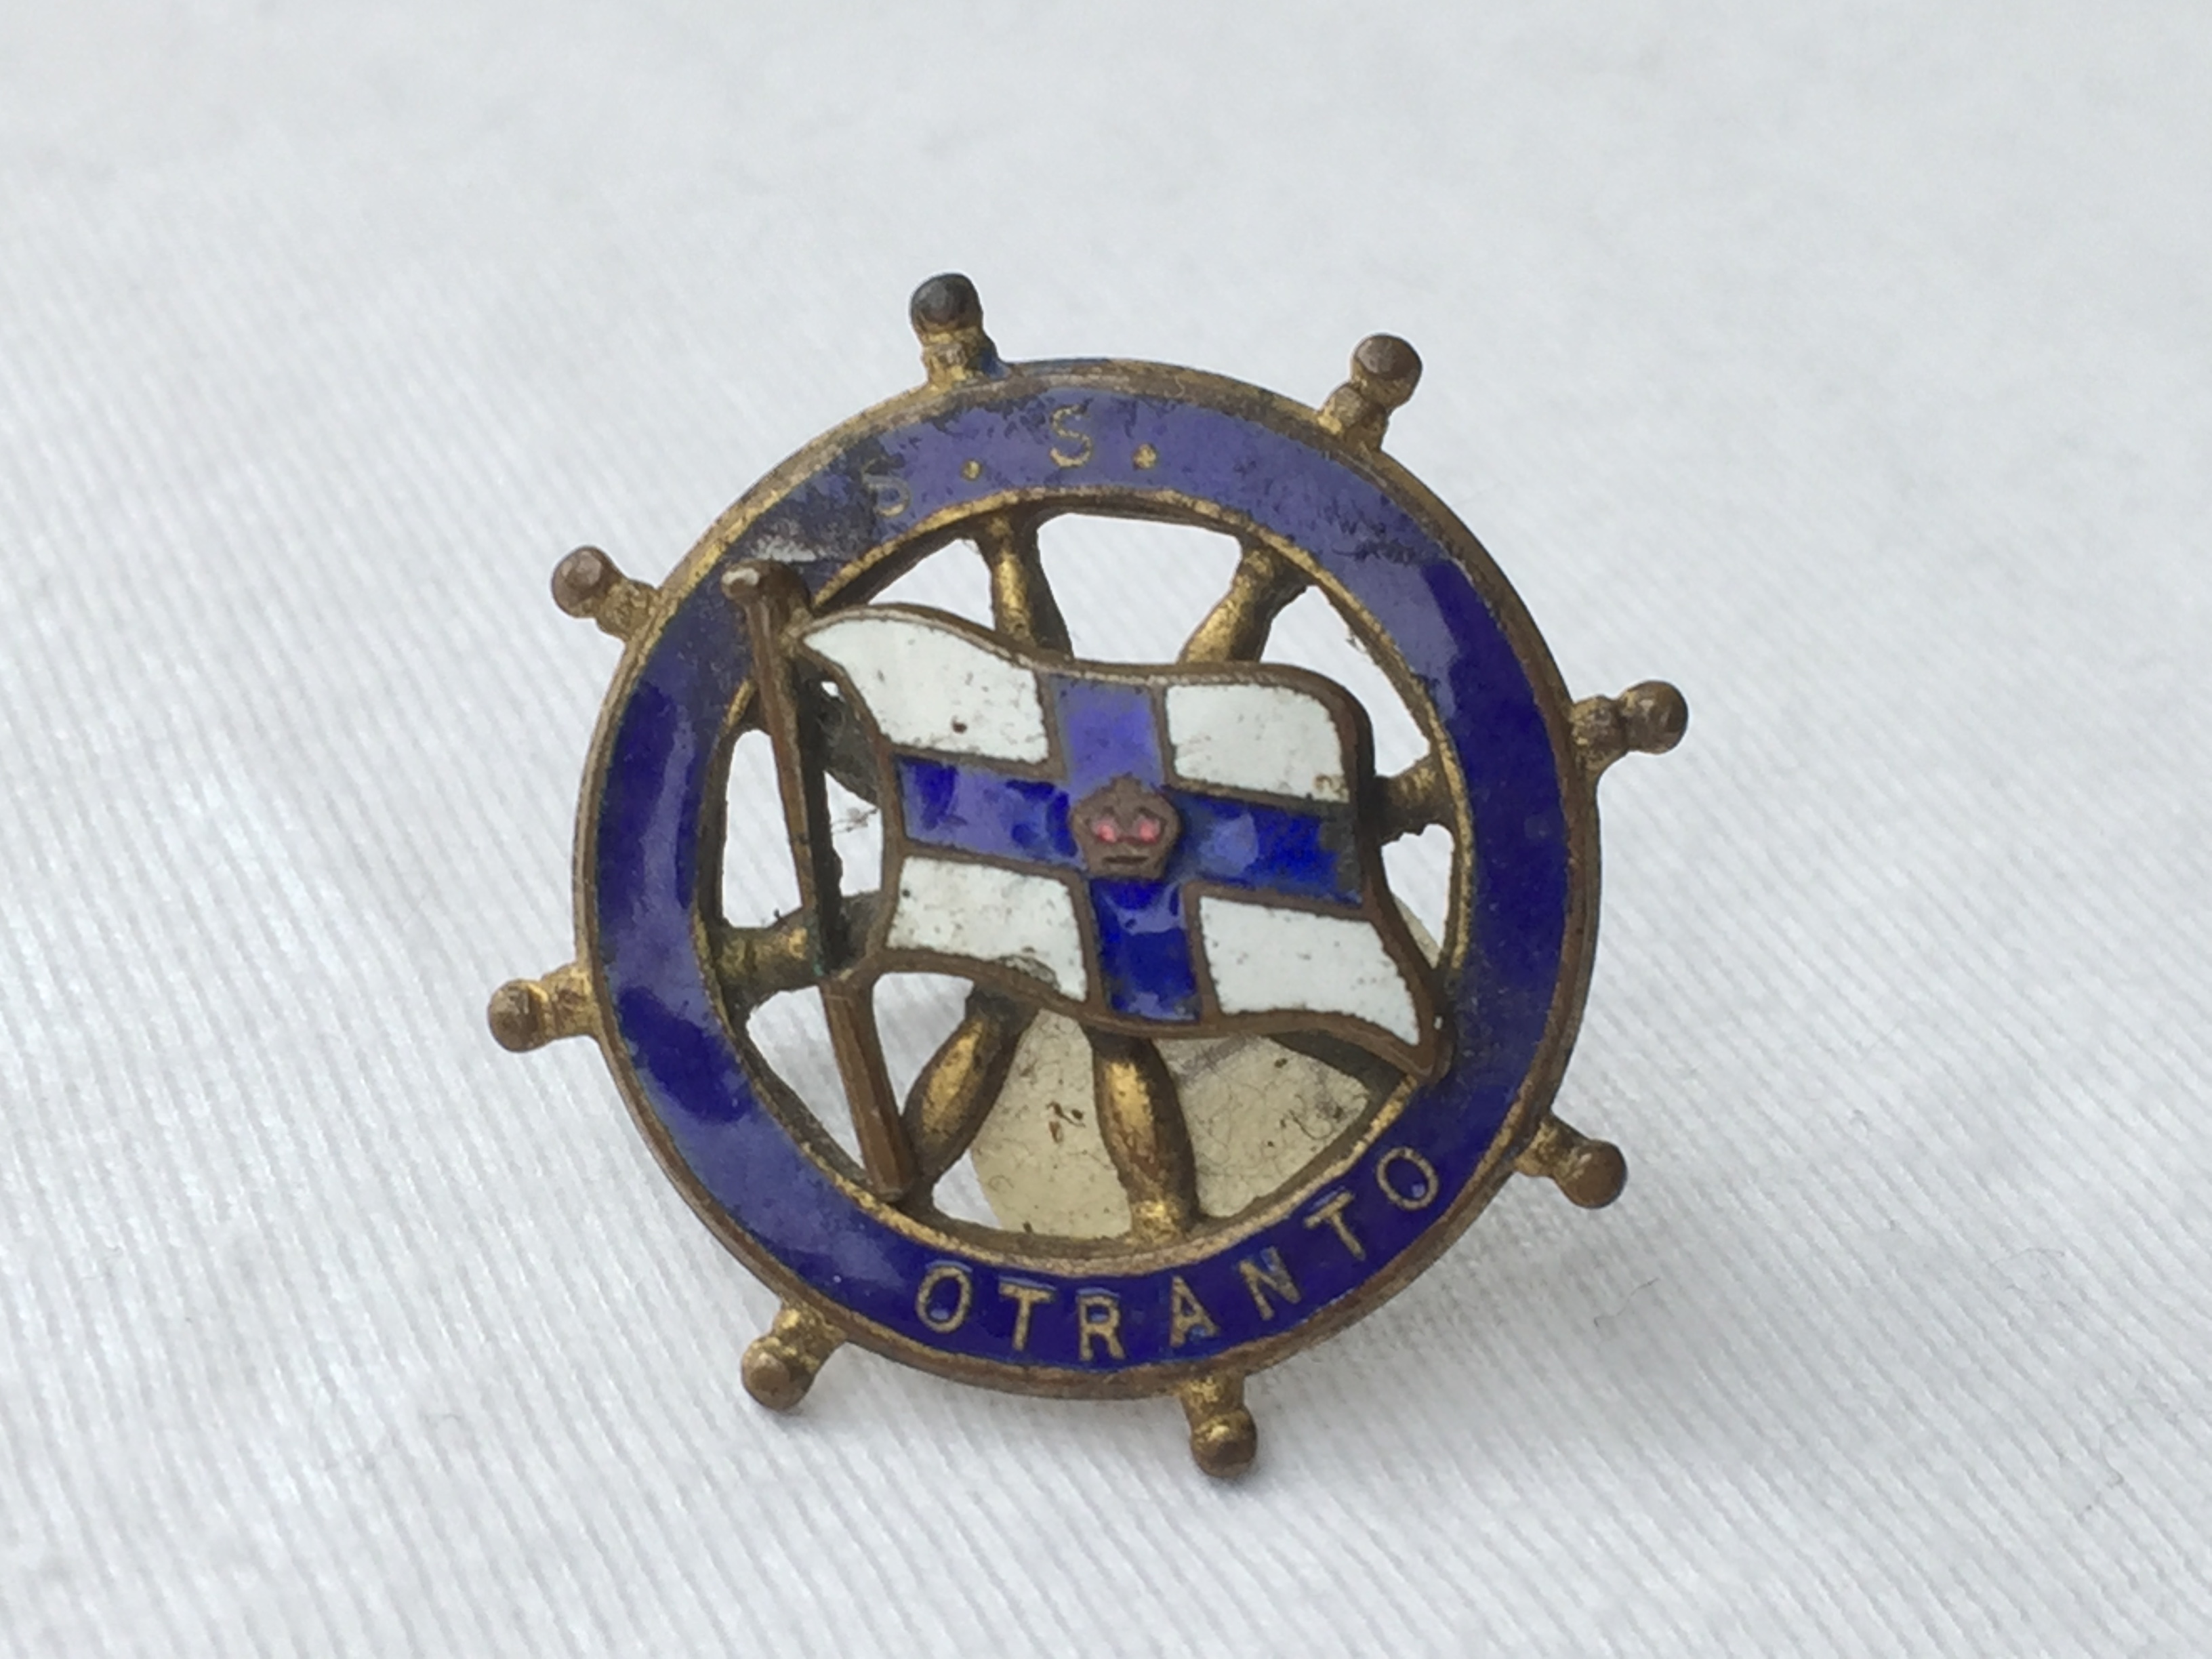 VERY RARE TO FIND LAPEL PIN BADGE FROM THE ORIENT LINE VESSEL THE SS OTRANTO 1926-1956